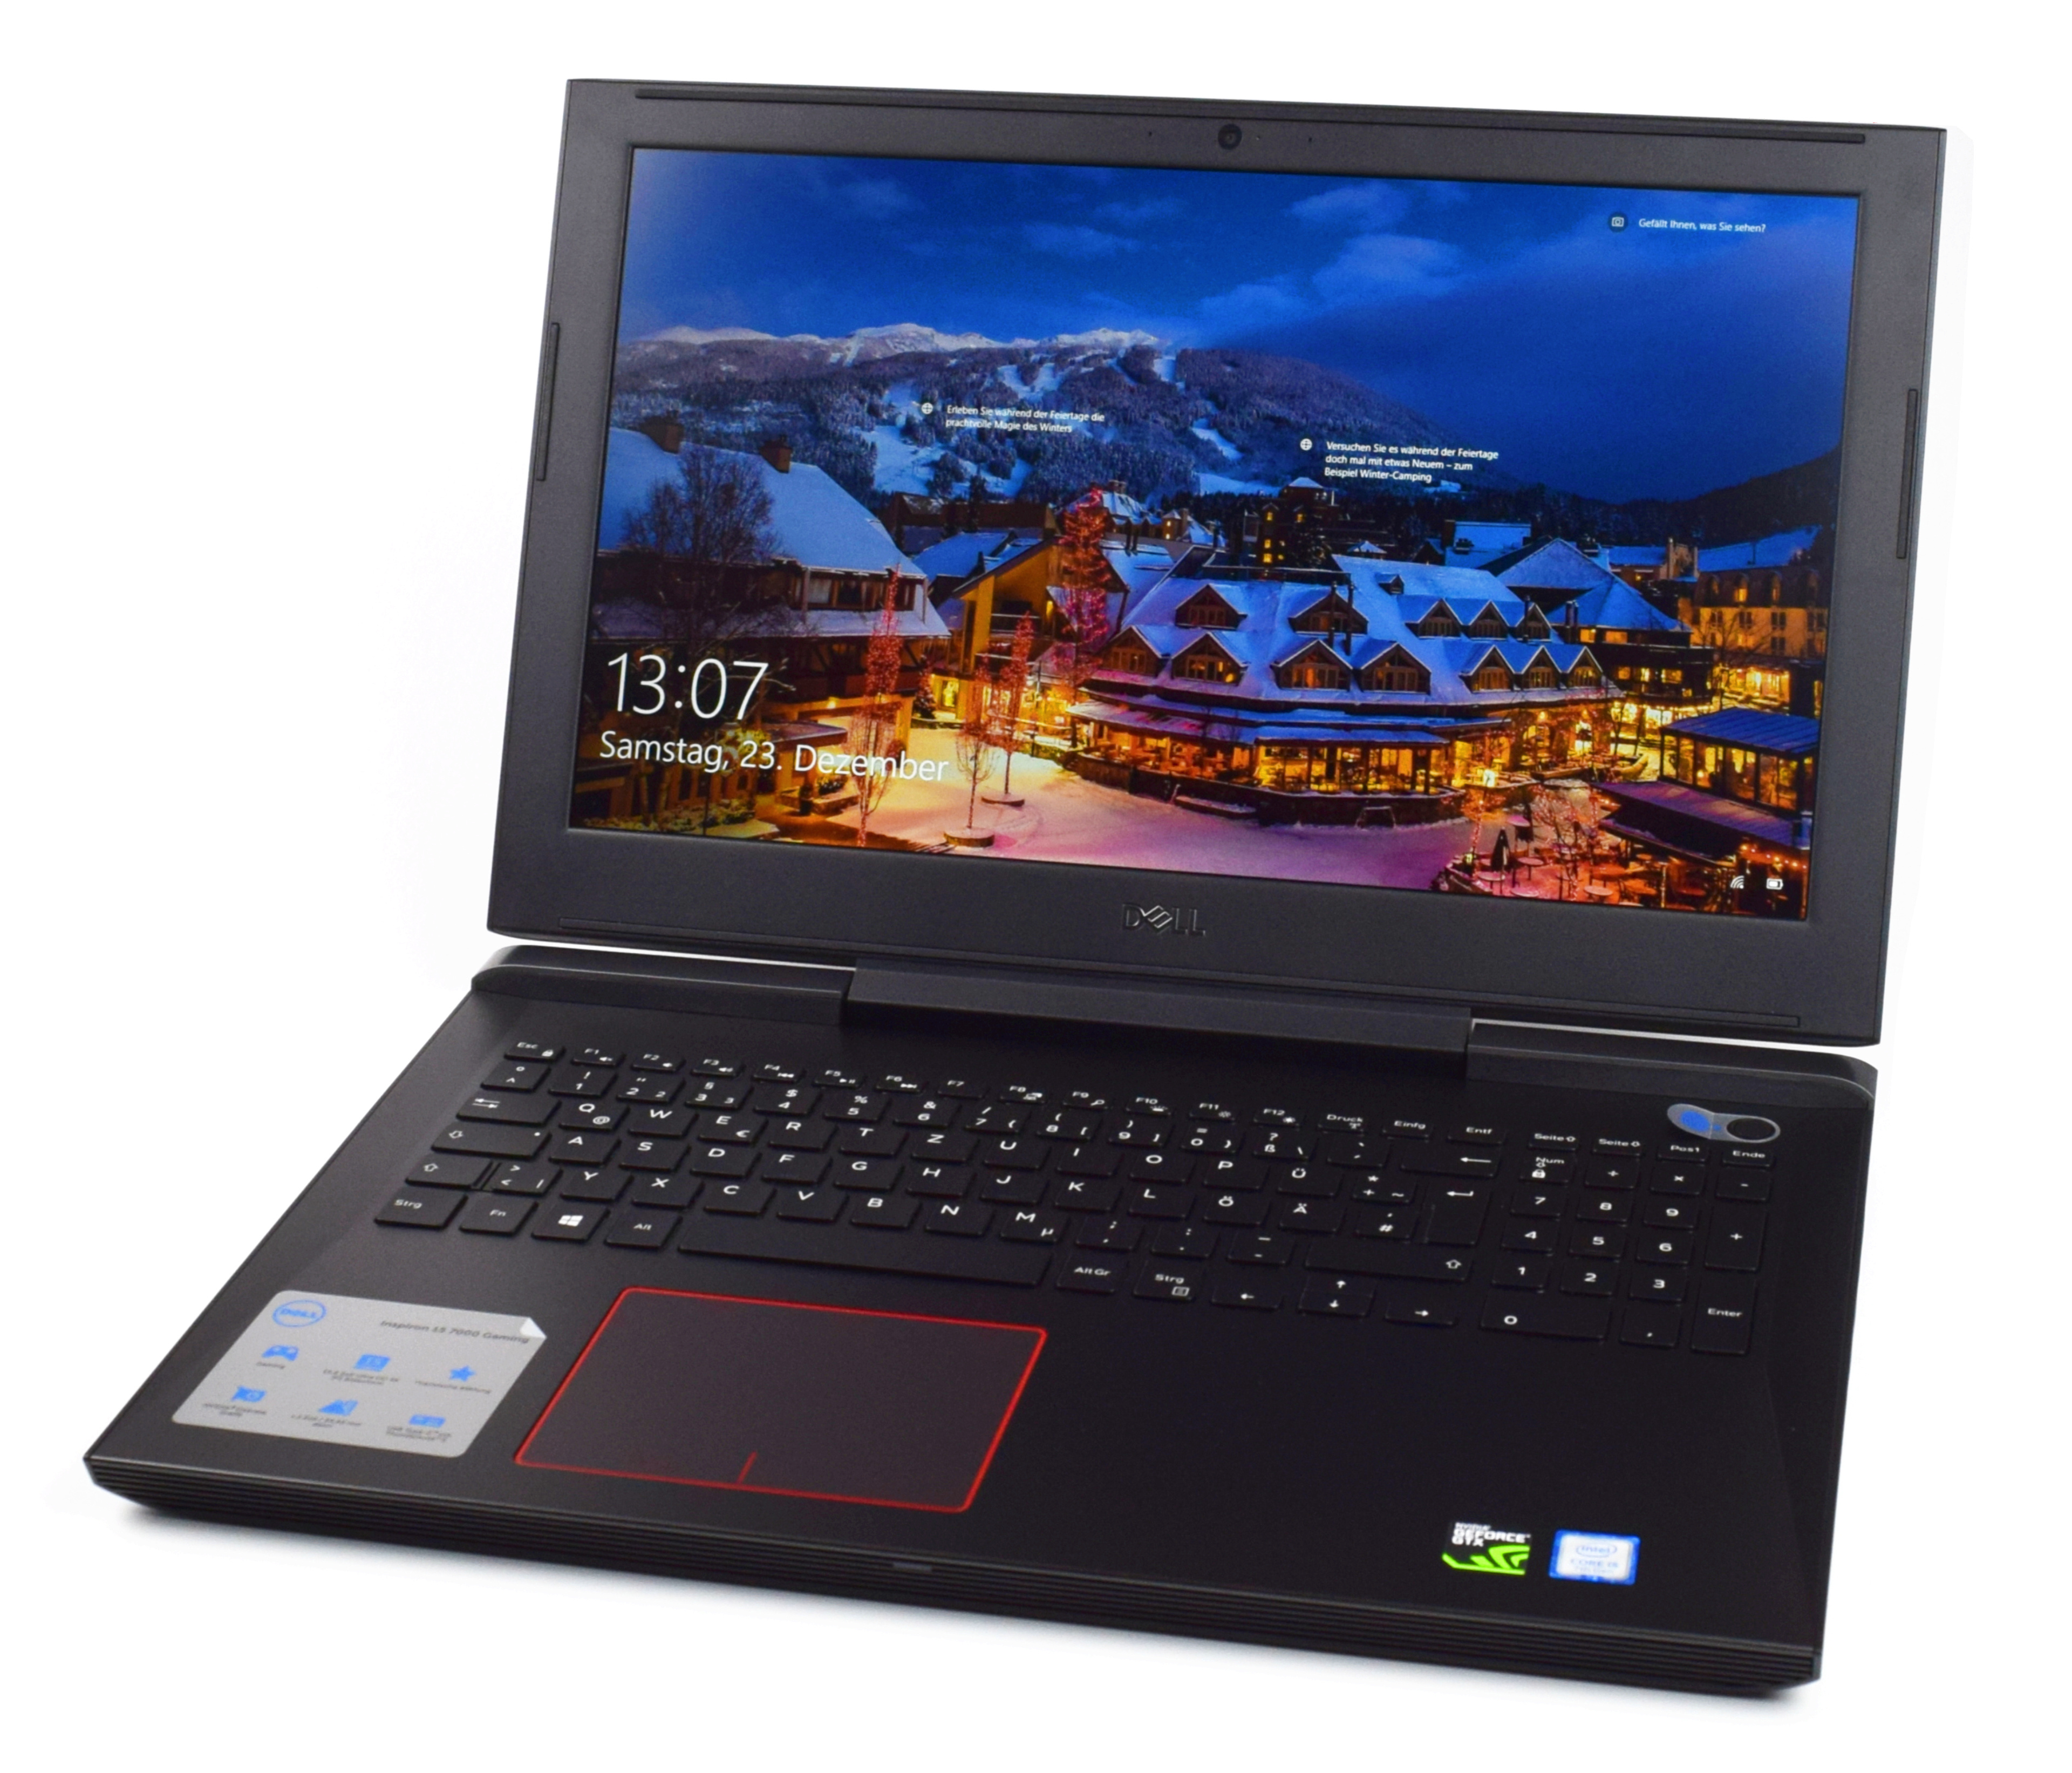 Dell Inspiron 15 7000 Series Gaming